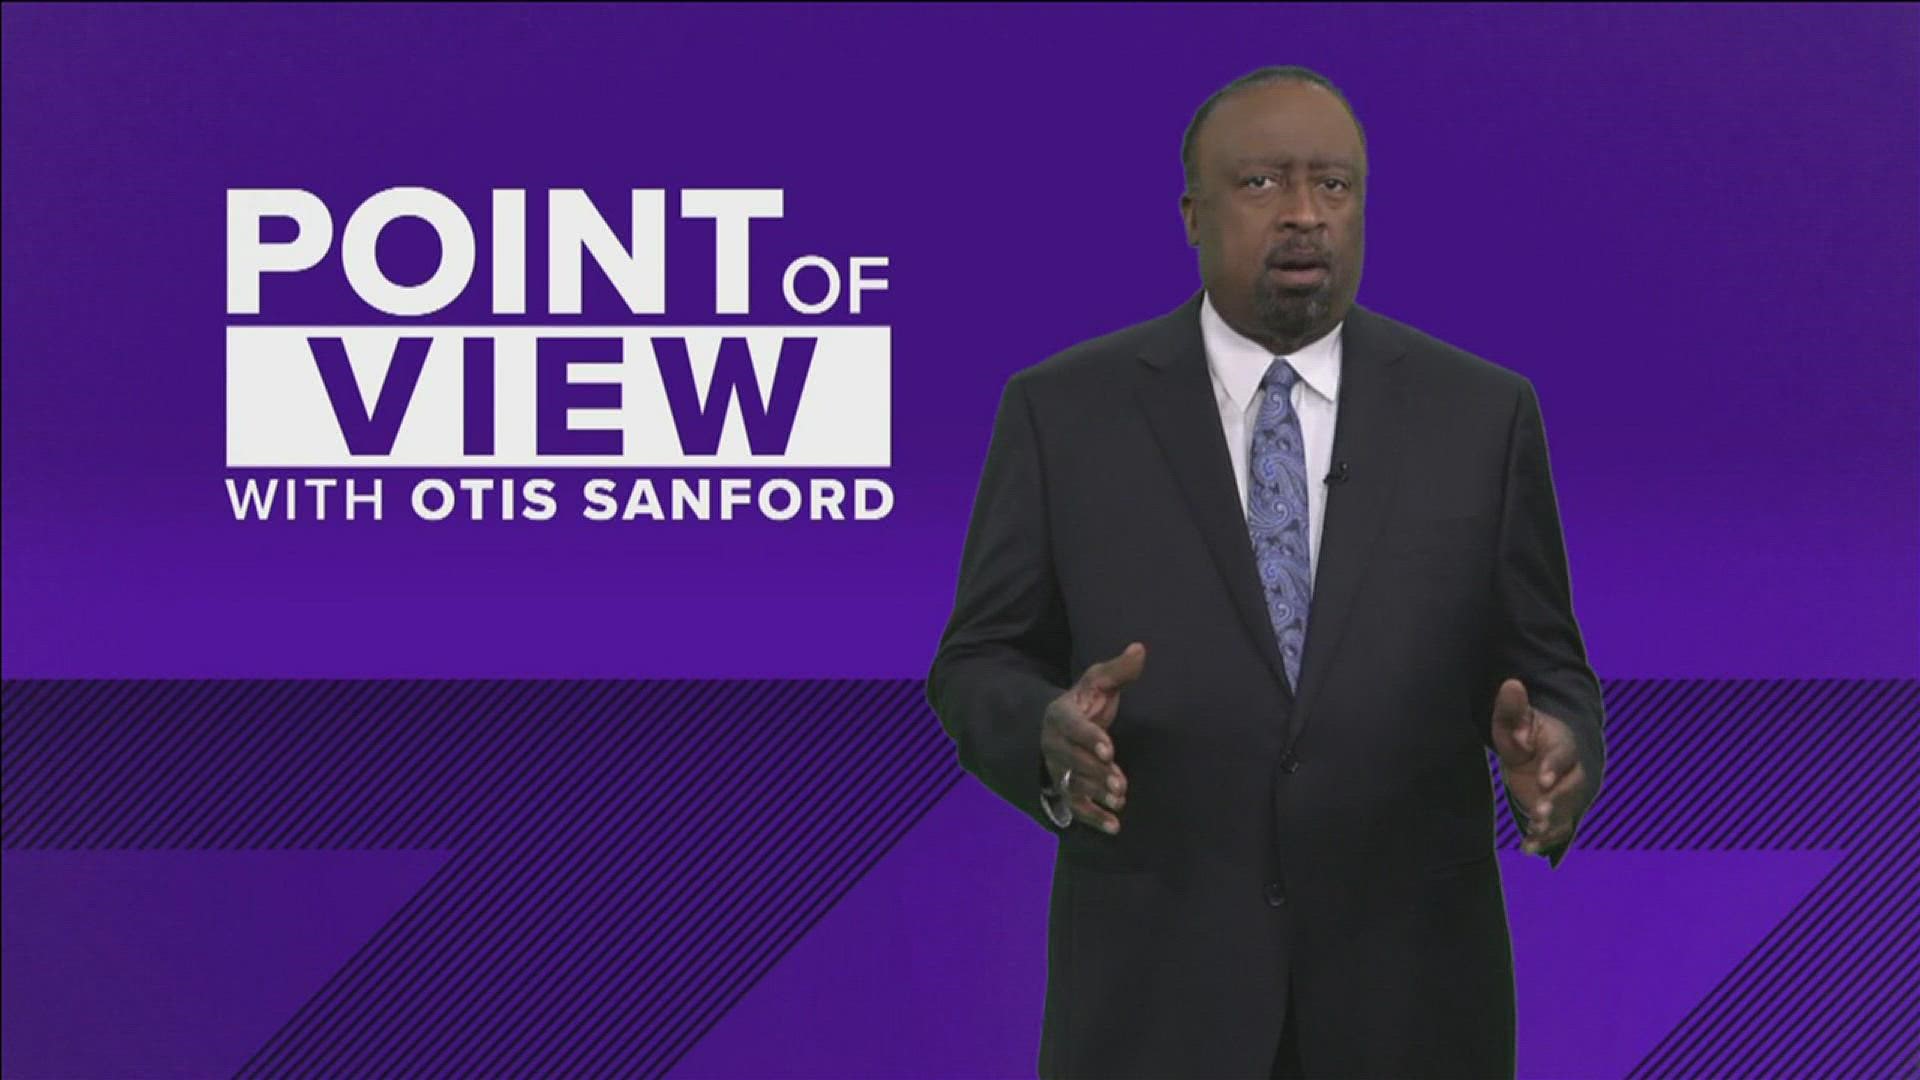 ABC24 political analyst and commentator Otis Sanford shared his point of view on the 60th anniversary of James Meredith’s historic enrollment at Ole Miss.